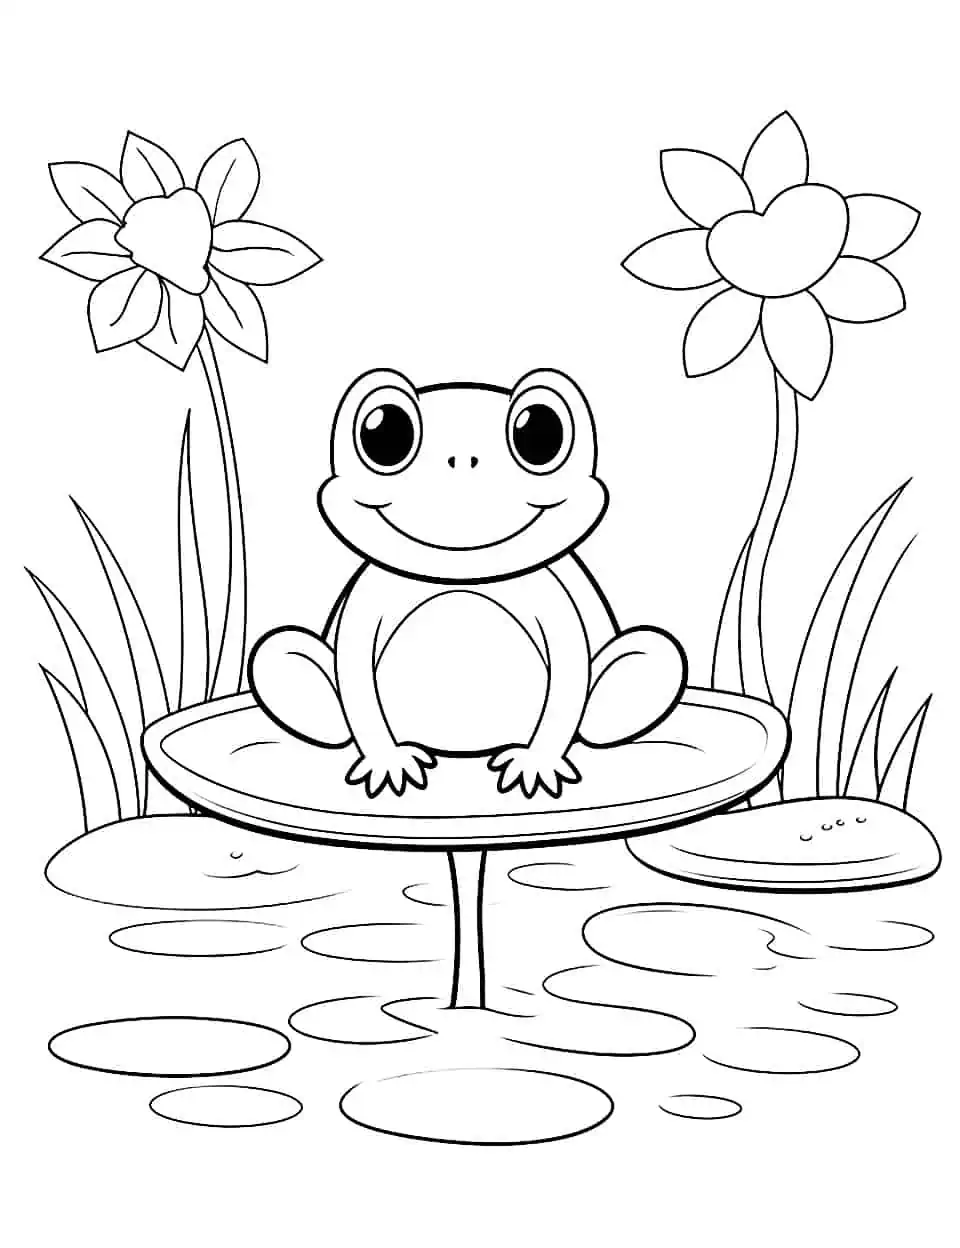 Frog's Lily Pad Home Spring Coloring Page - A fun and simple coloring page of a frog resting on a lily pad in a spring pond for toddlers.